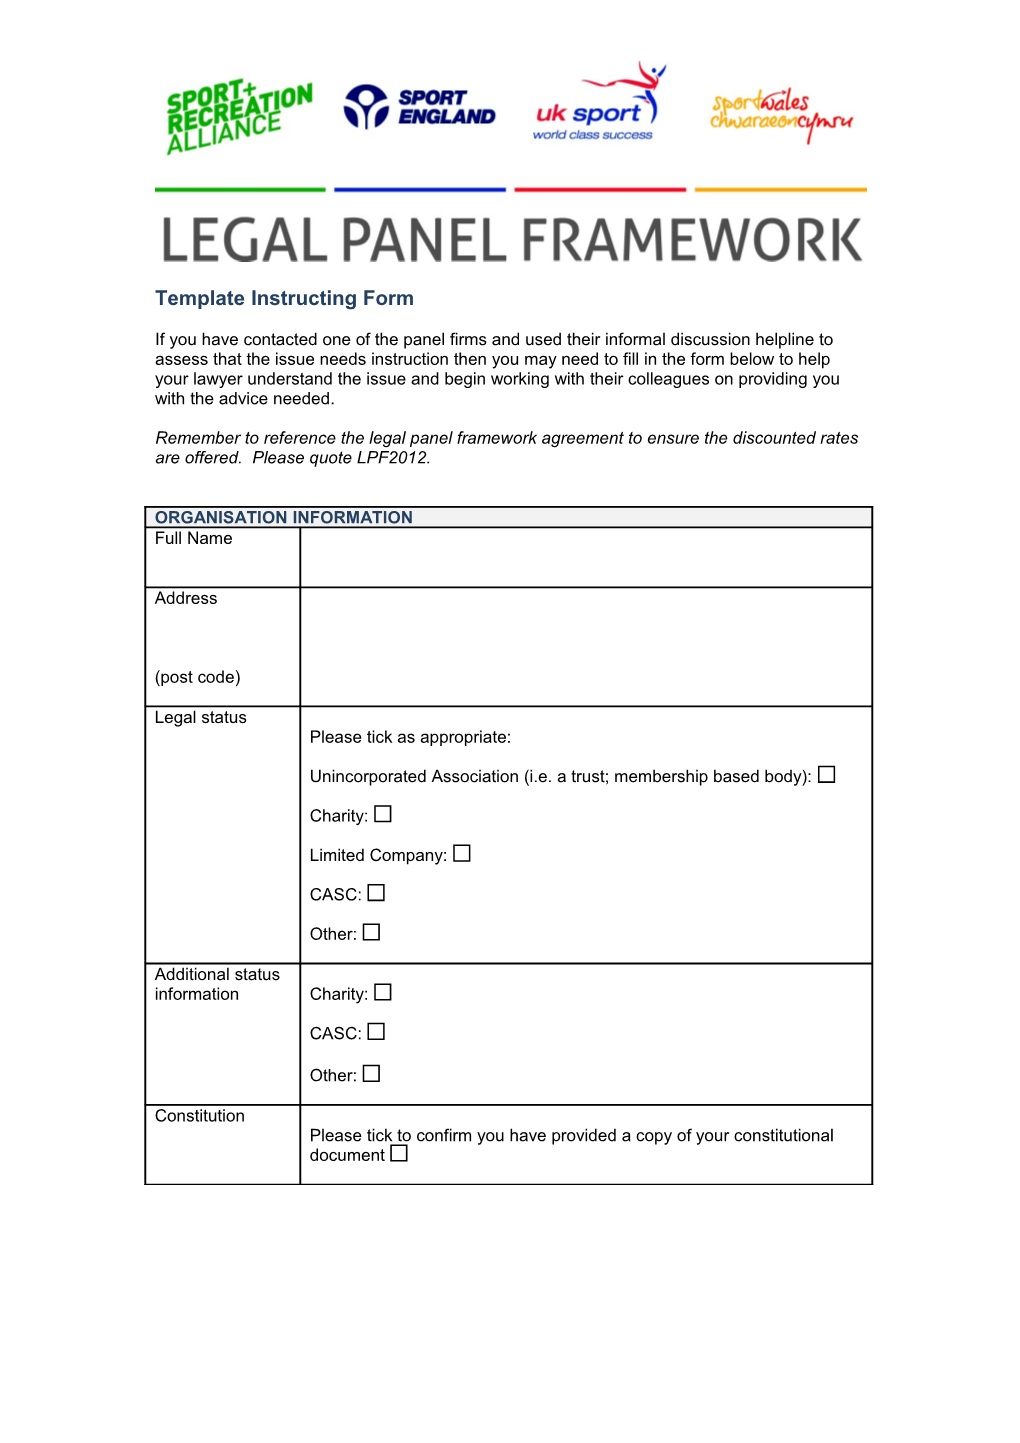 Template Instructing Form